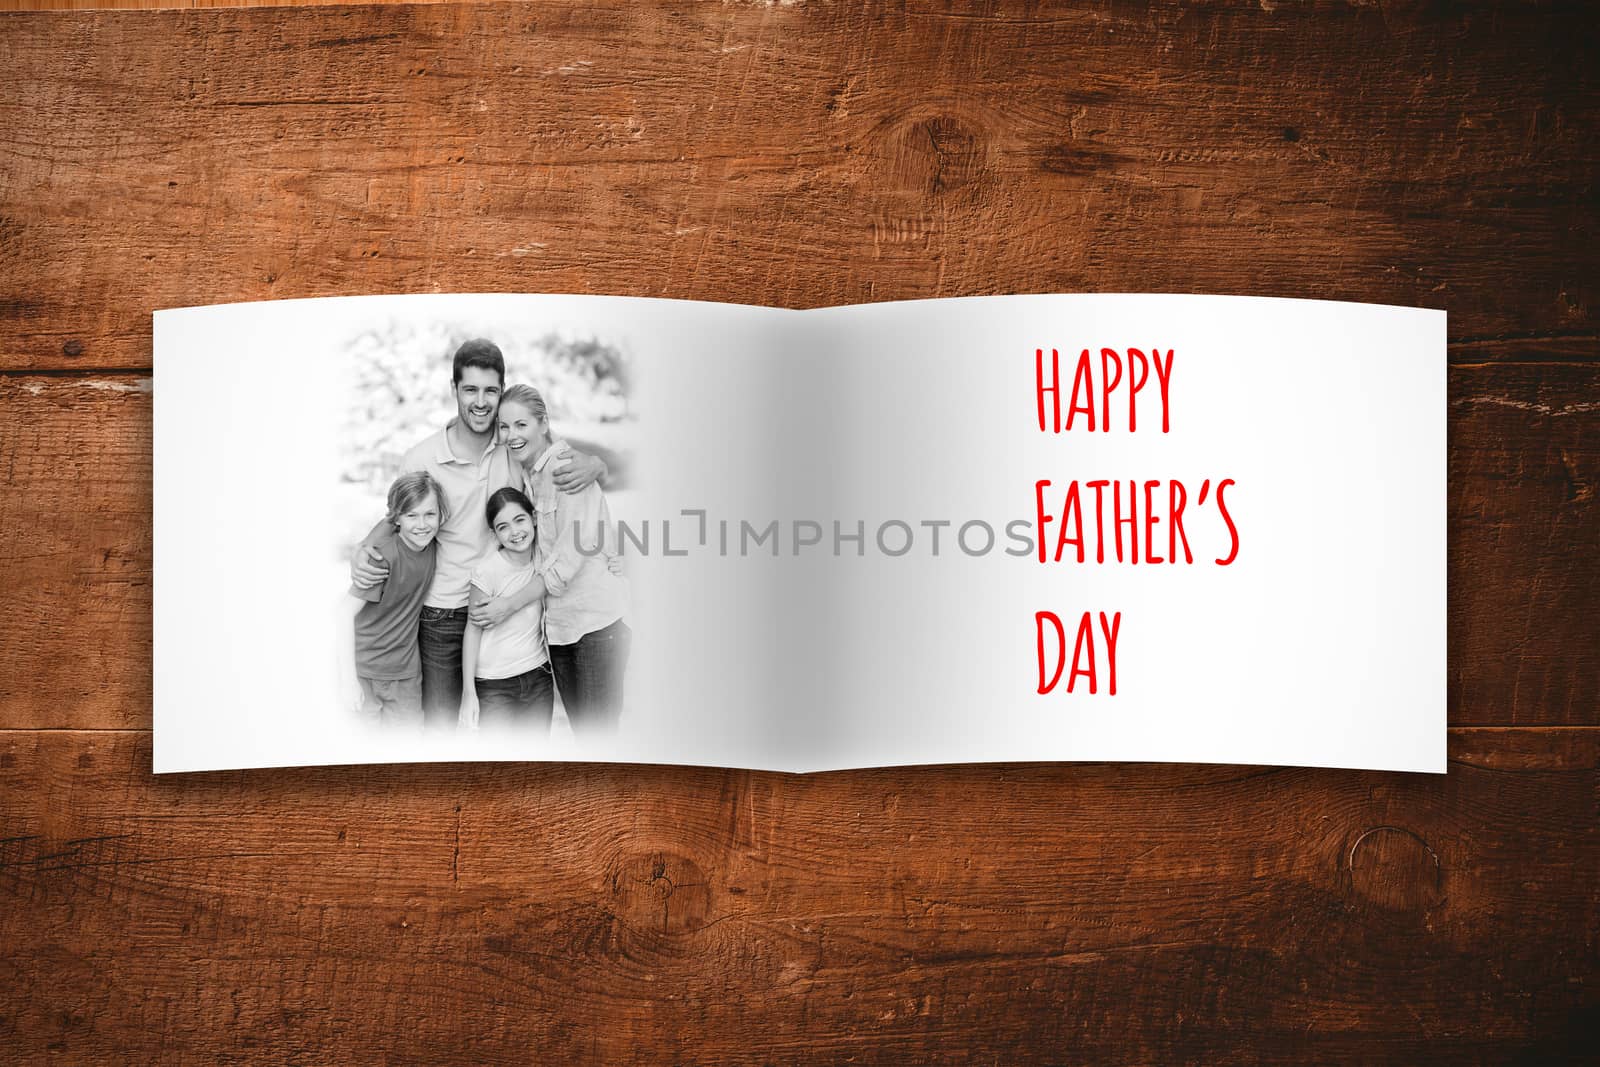 Composite image of happy family by Wavebreakmedia